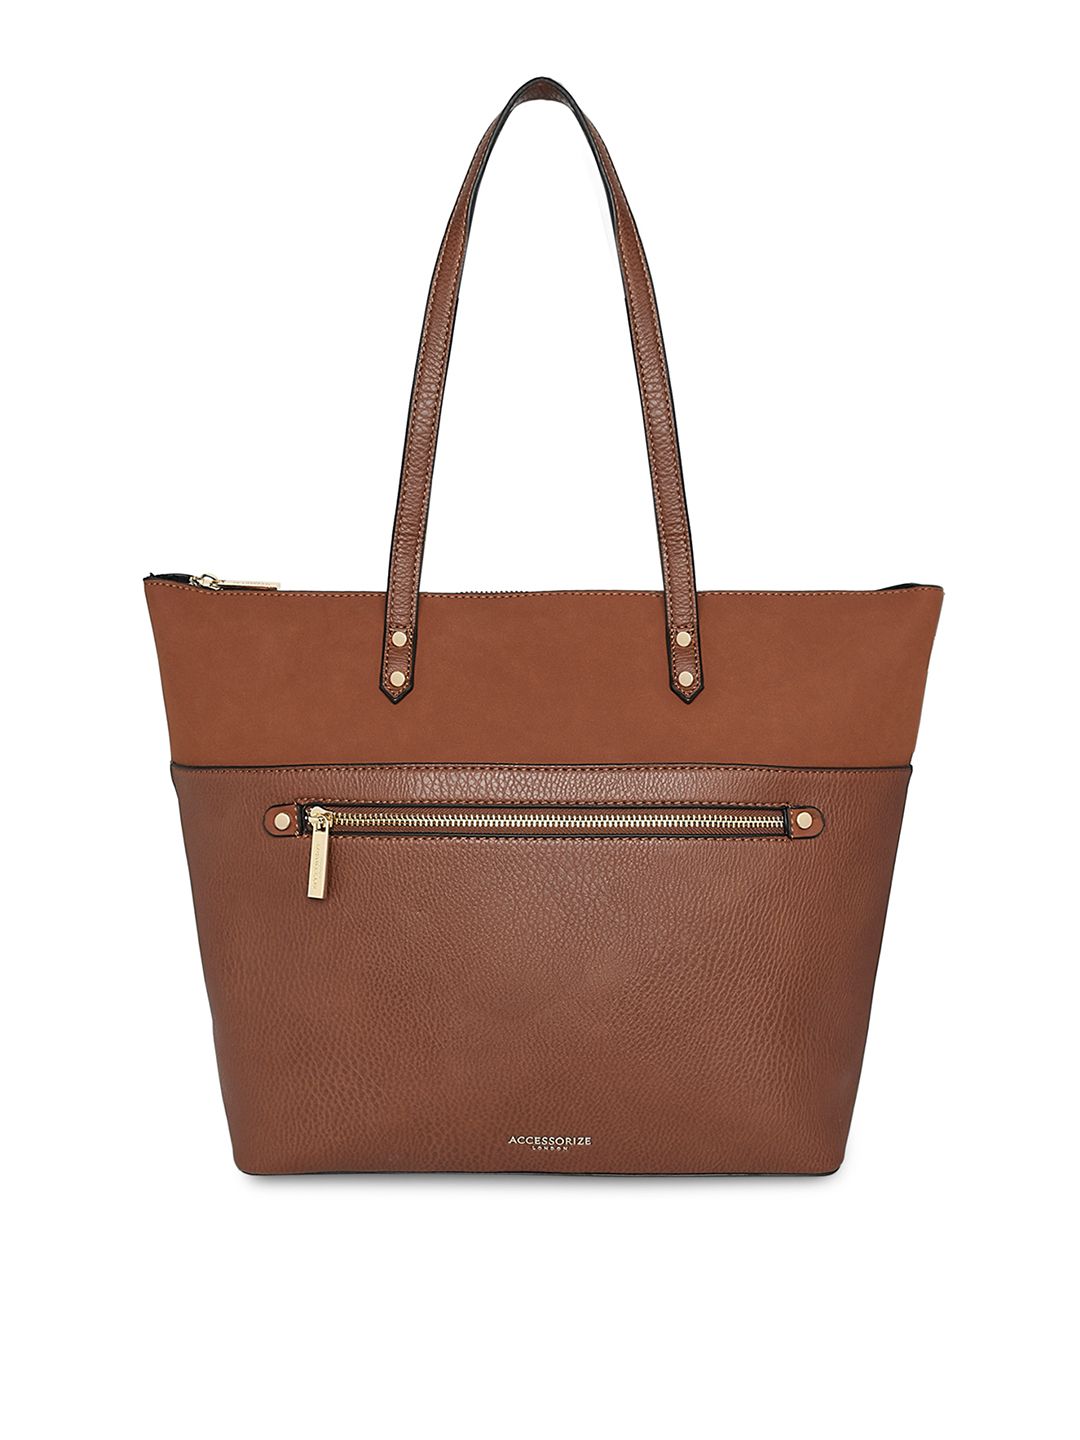 Accessorize Women Tan-Brown Solid Molly Shoulder Bag Price in India